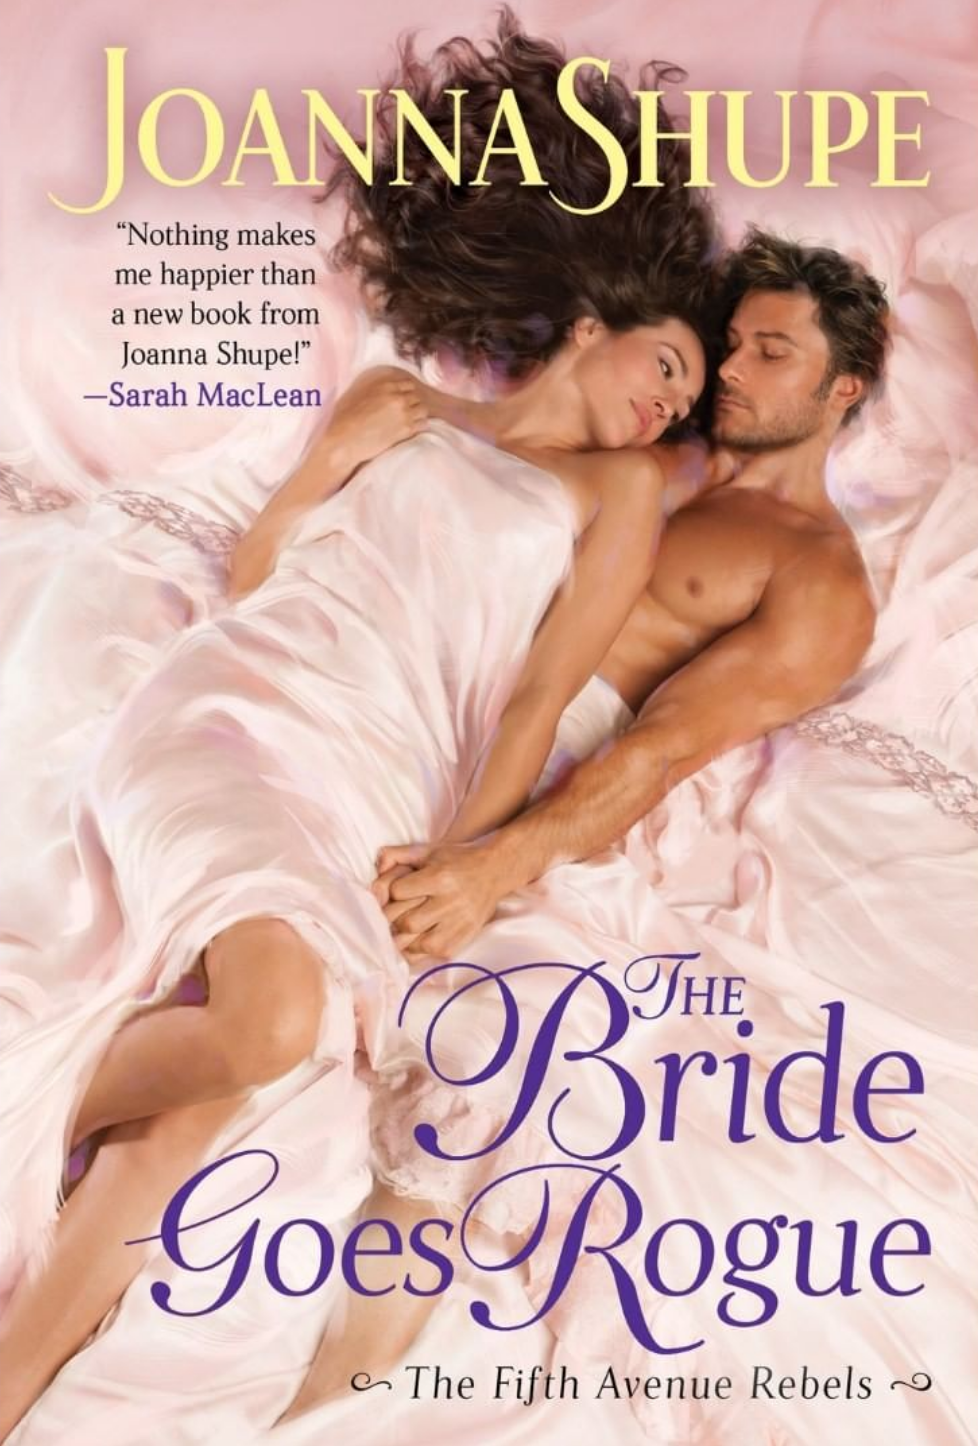 The Bride Goes Rogue #3 by Joanna Shupe Free Download